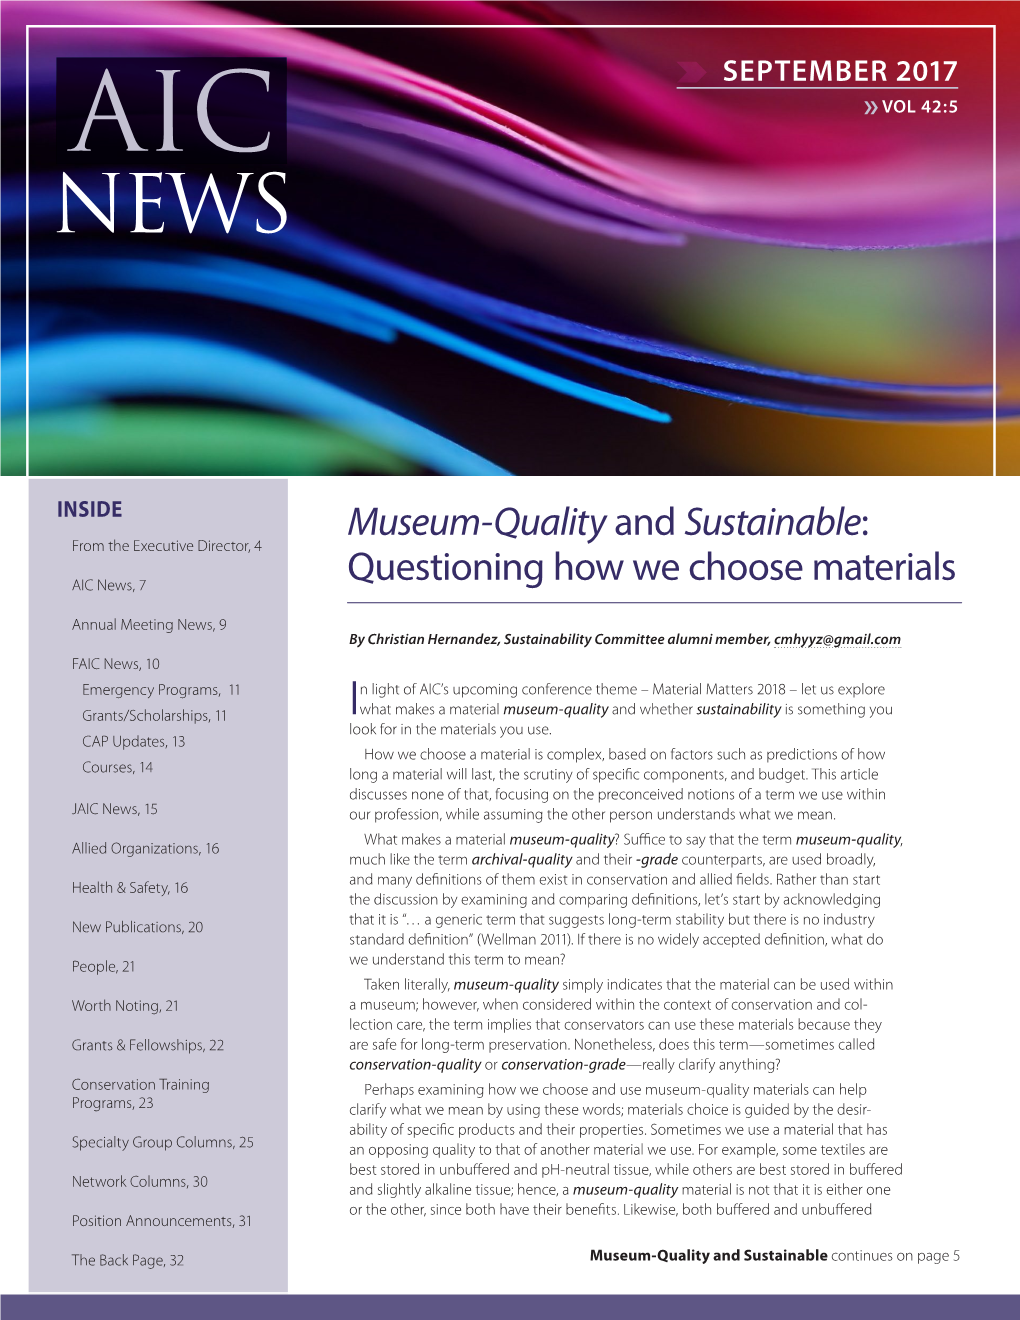 Museum-Quality and Sustainable: from the Executive Director, 4